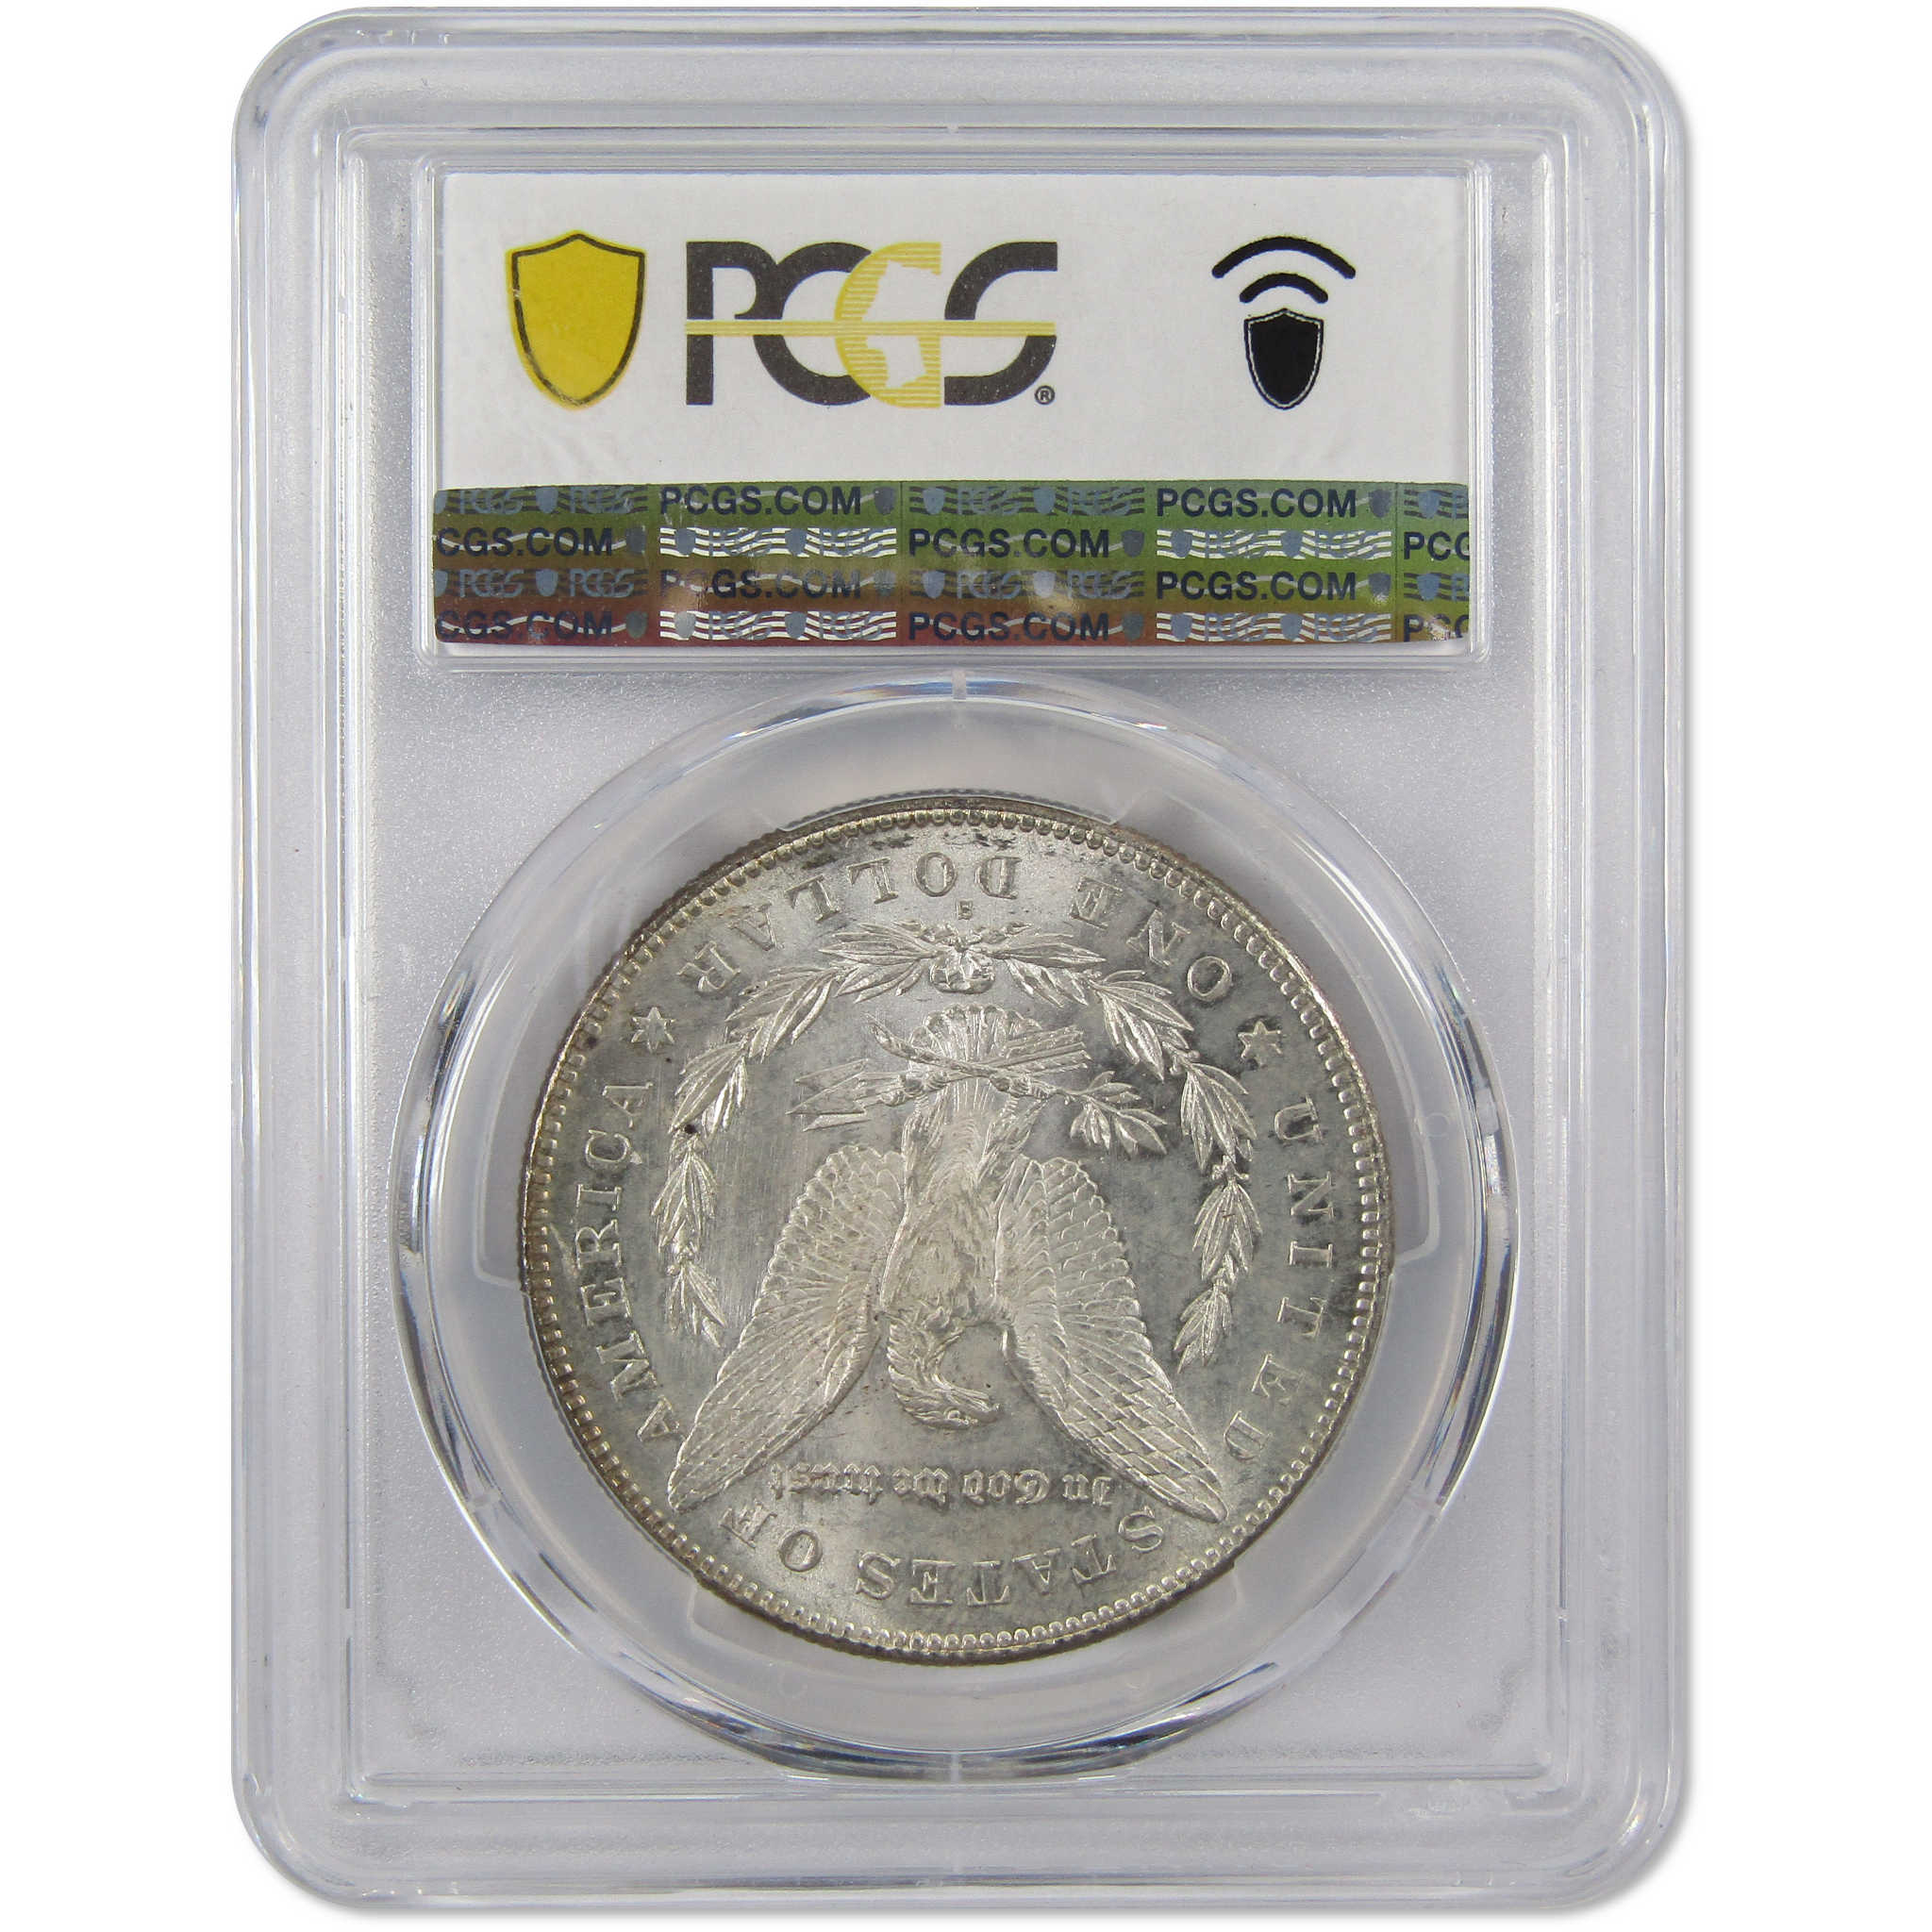 1878 S Morgan Dollar MS 63 PCGS 90% Silver $1 Coin SKU:I9742 - Morgan coin - Morgan silver dollar - Morgan silver dollar for sale - Profile Coins &amp; Collectibles